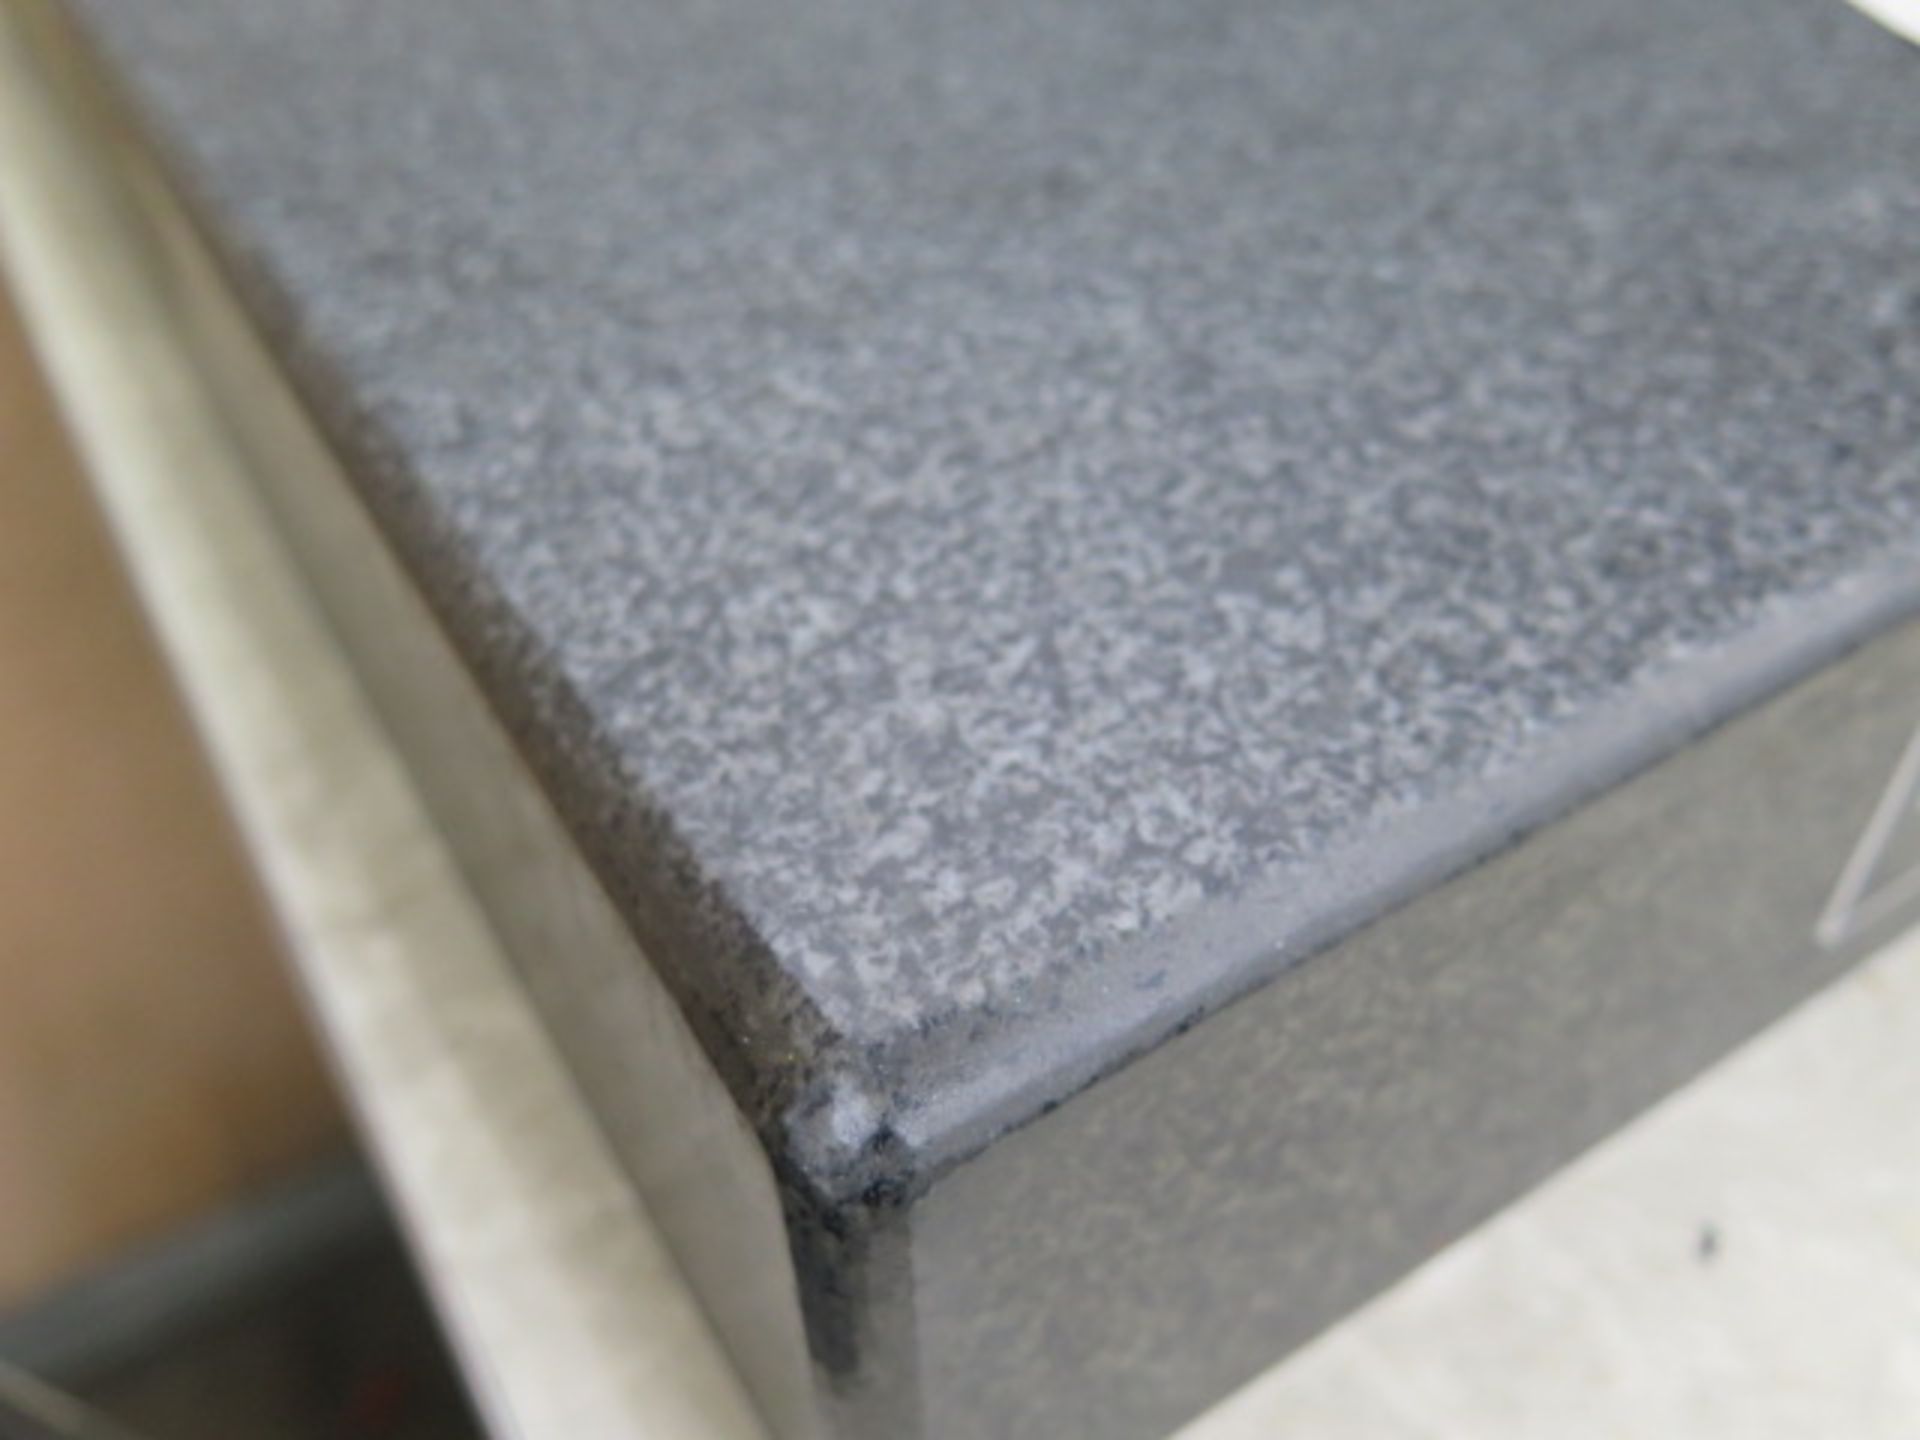 Standridge 18" x 24" x 3" Granite Surface Plate w/ Cabinet Base (SOLD AS-IS - NO WARRANTY) - Image 4 of 6